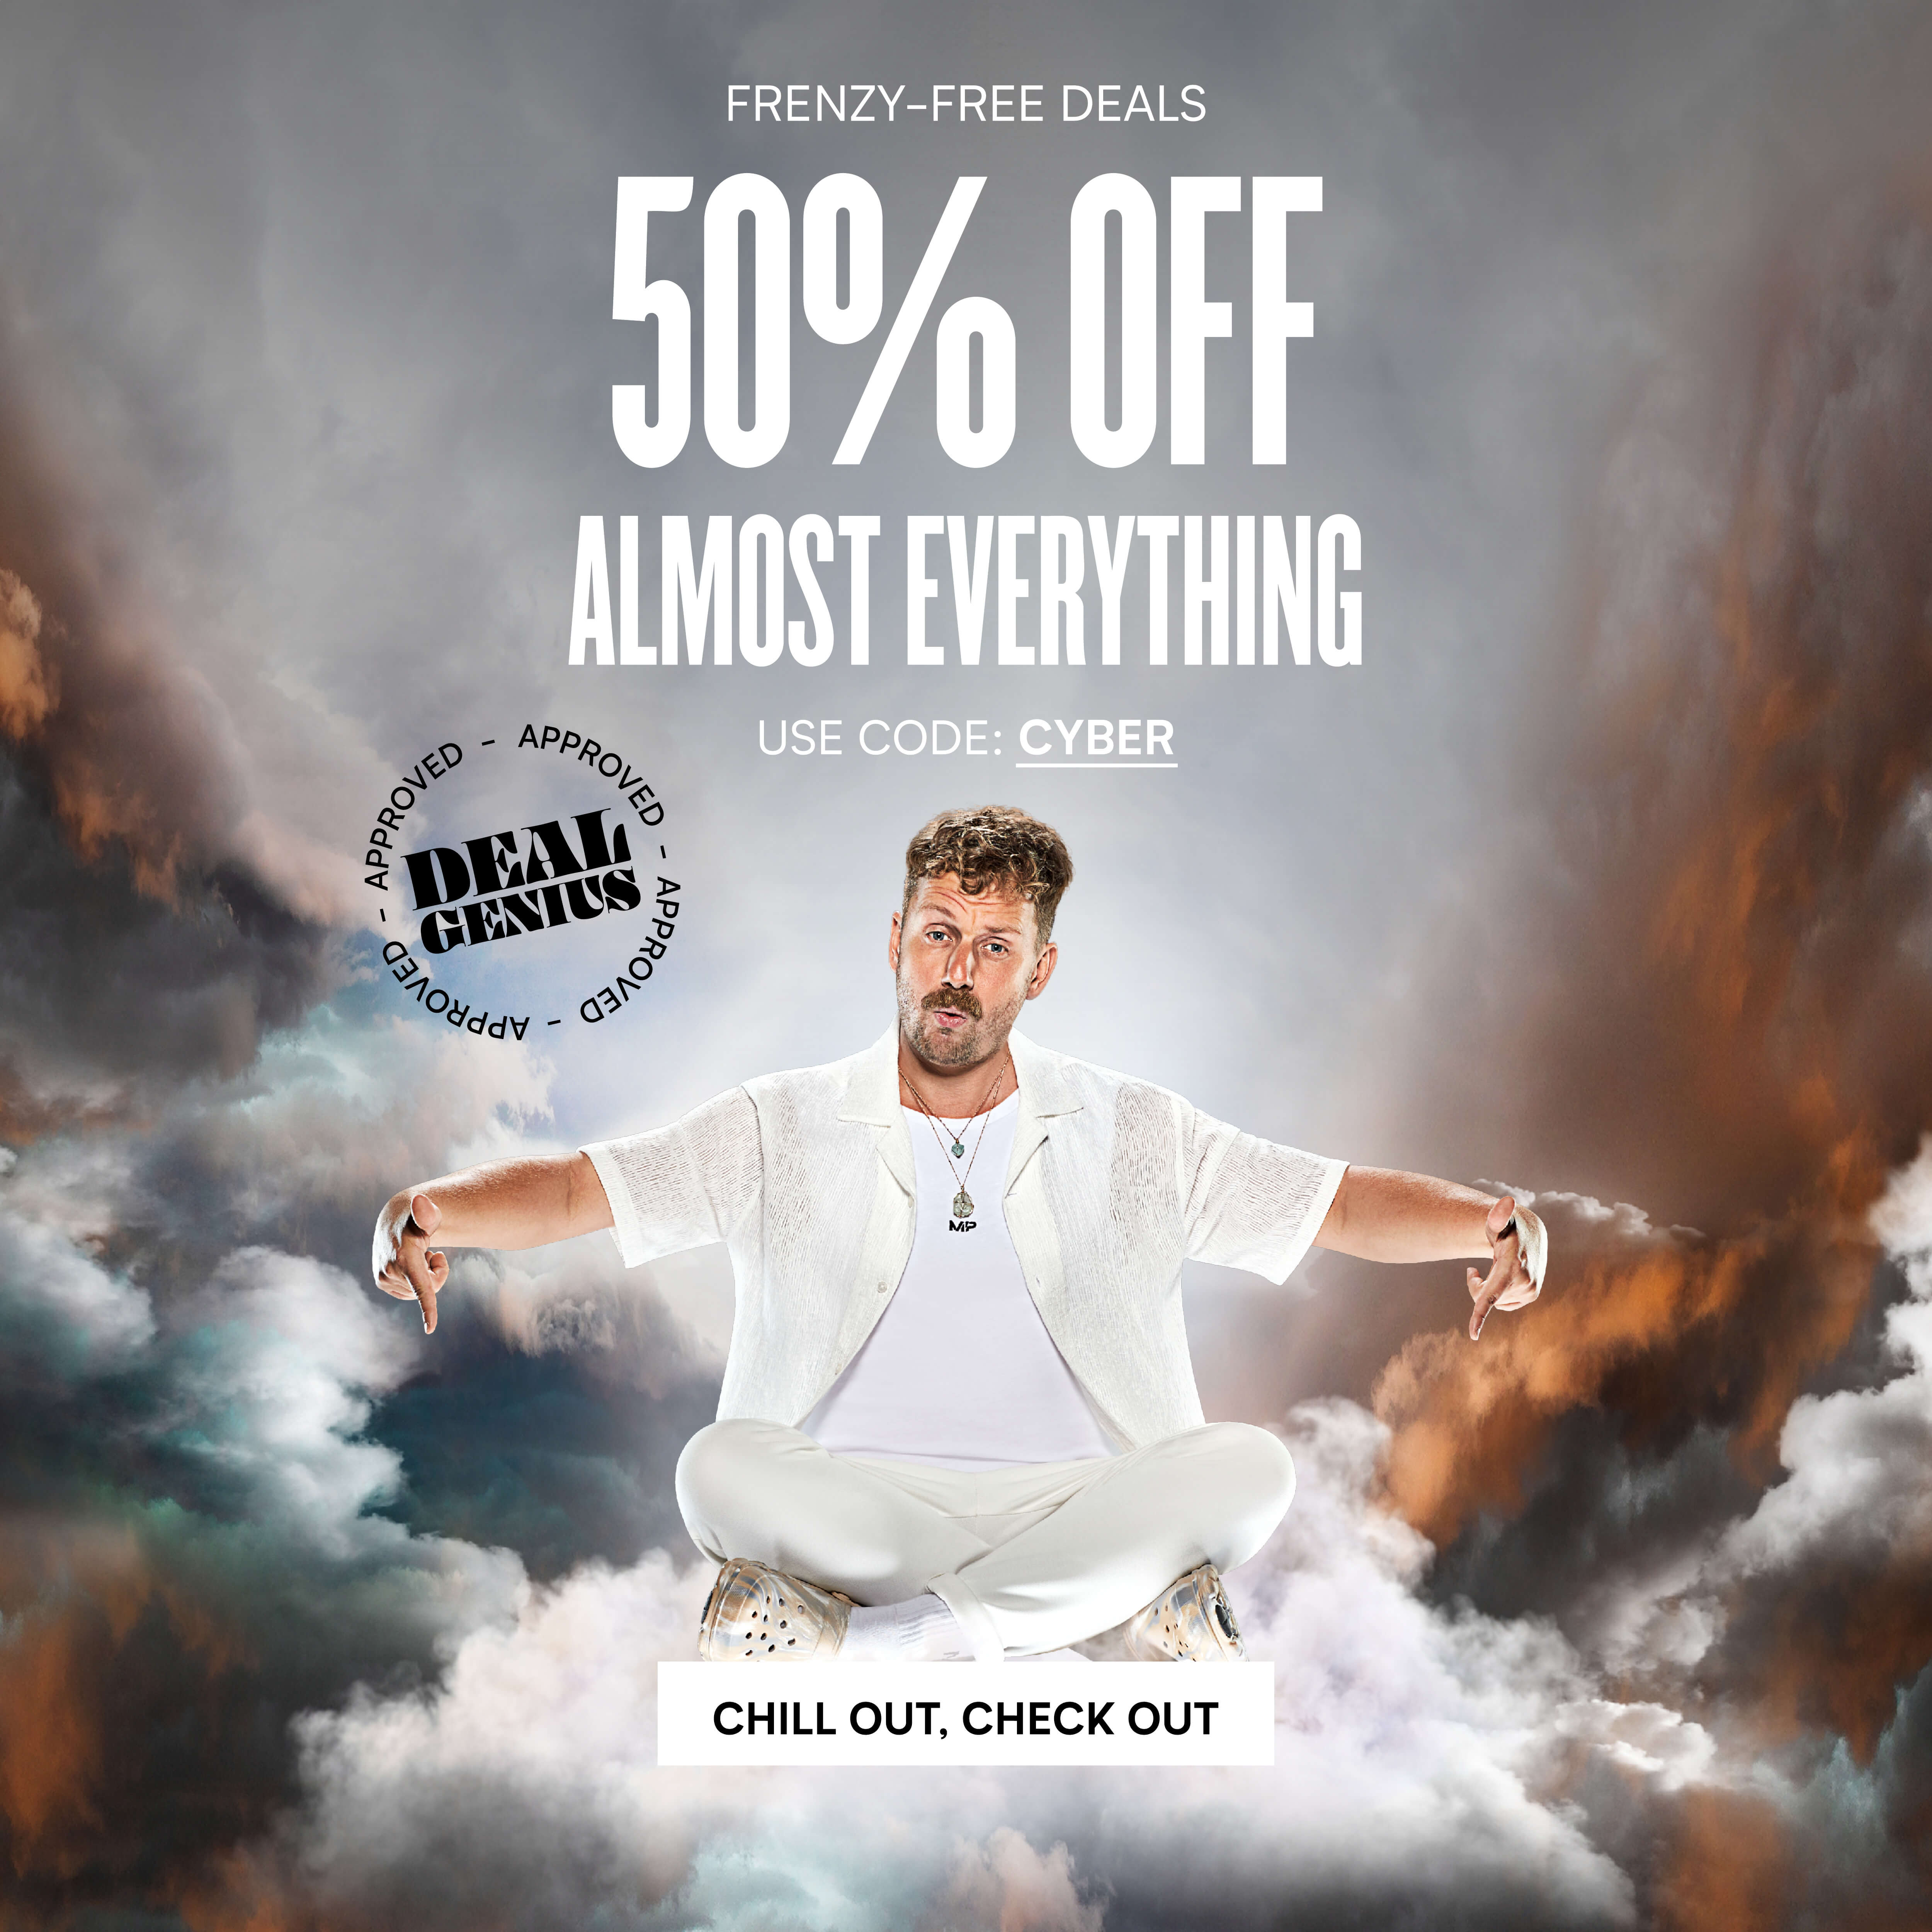 50% off almost everything FRENZY-FREE DEALS 